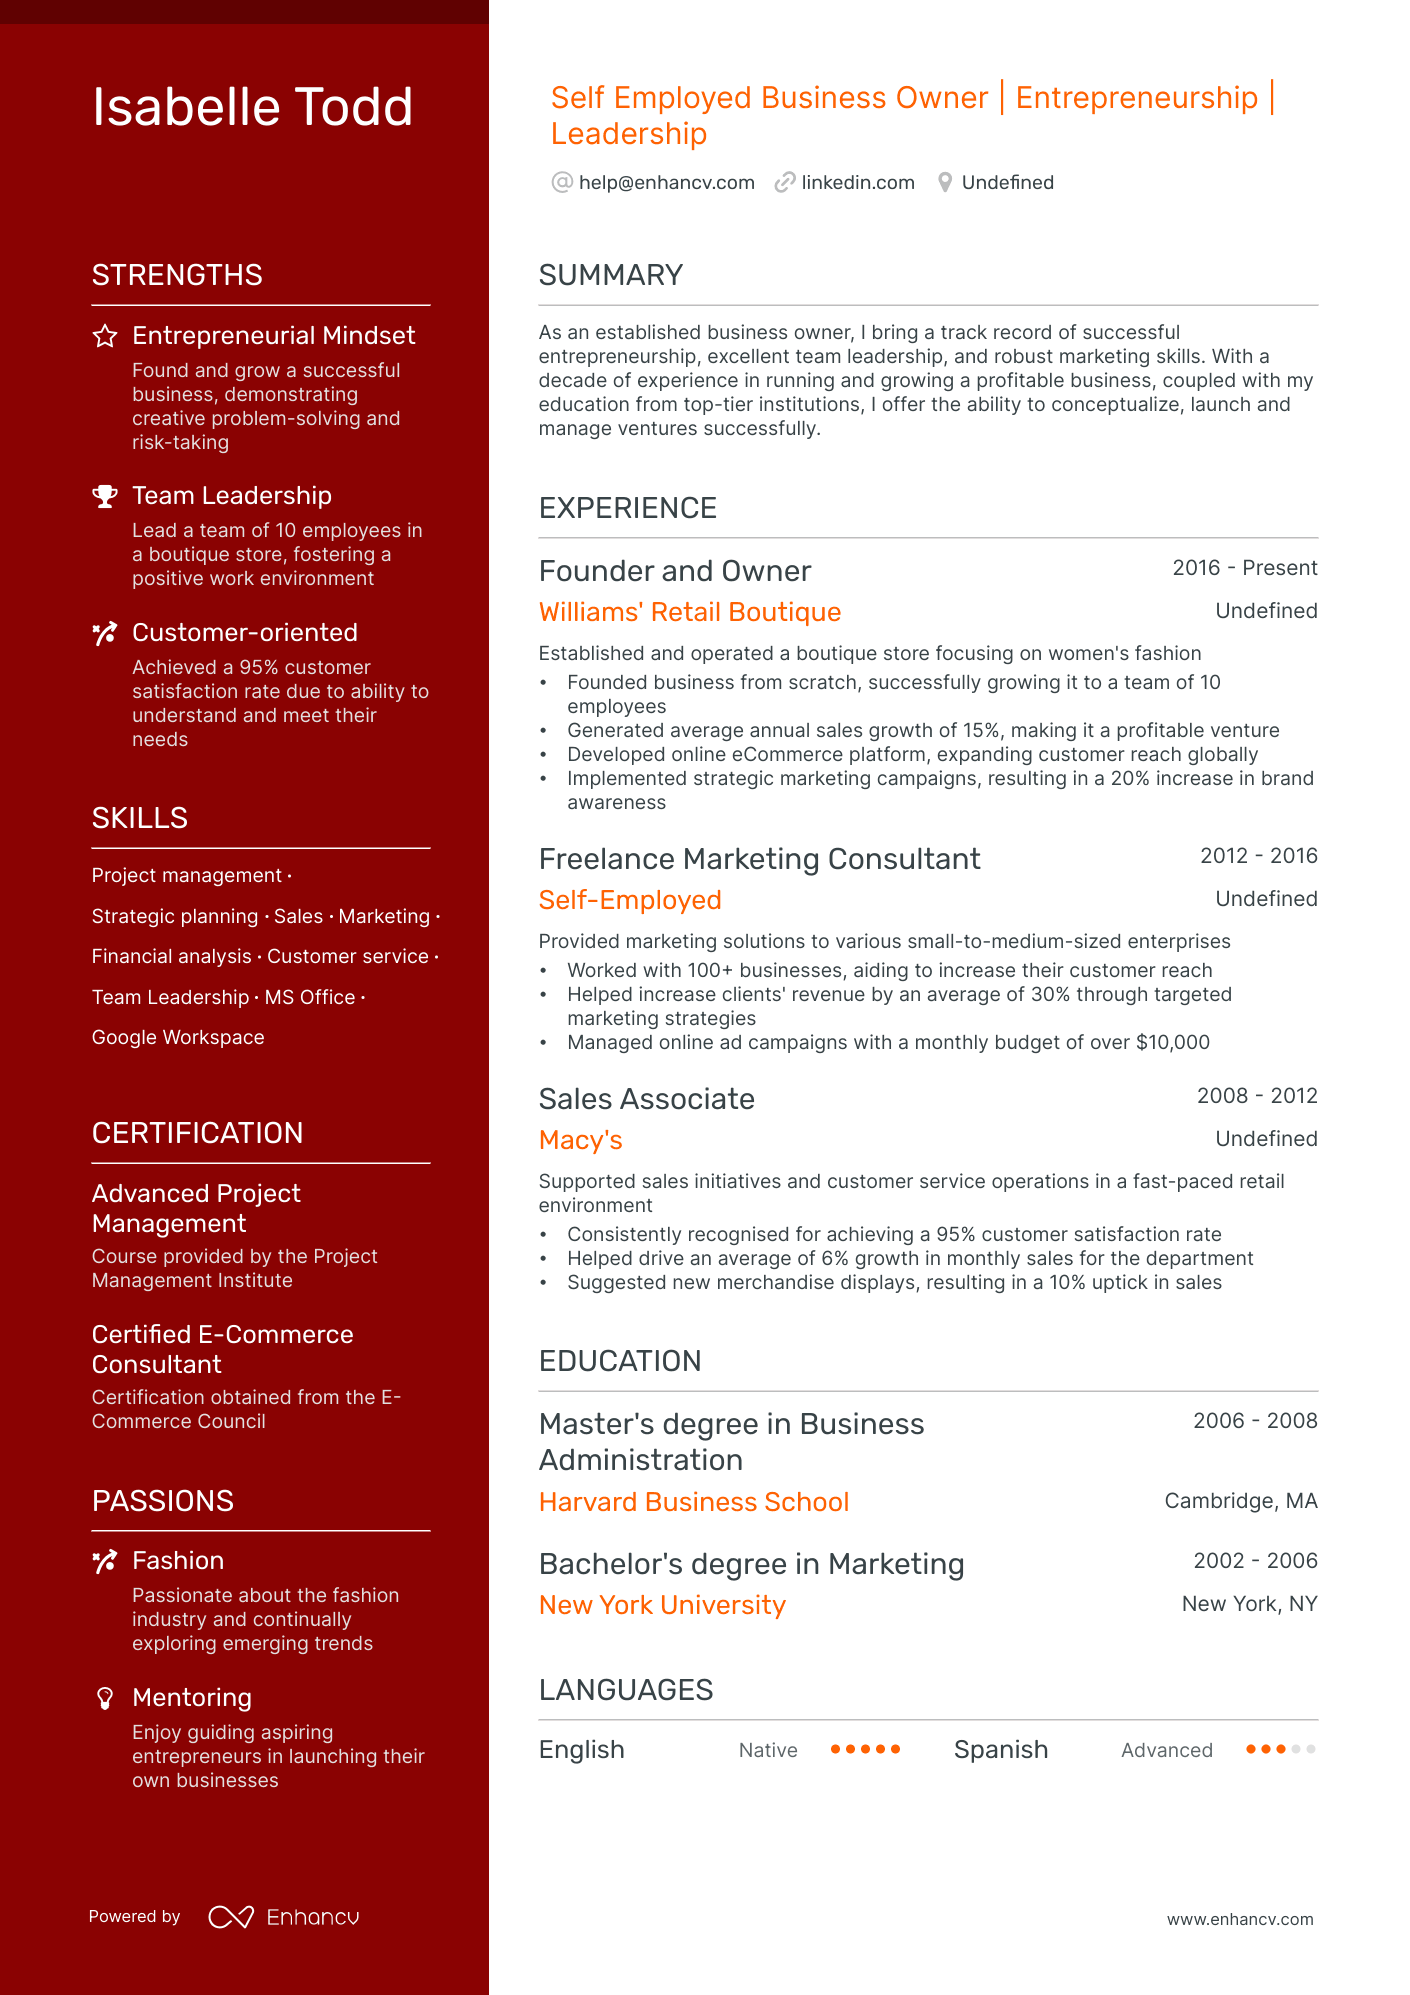 Self Employed Business Owner resume example